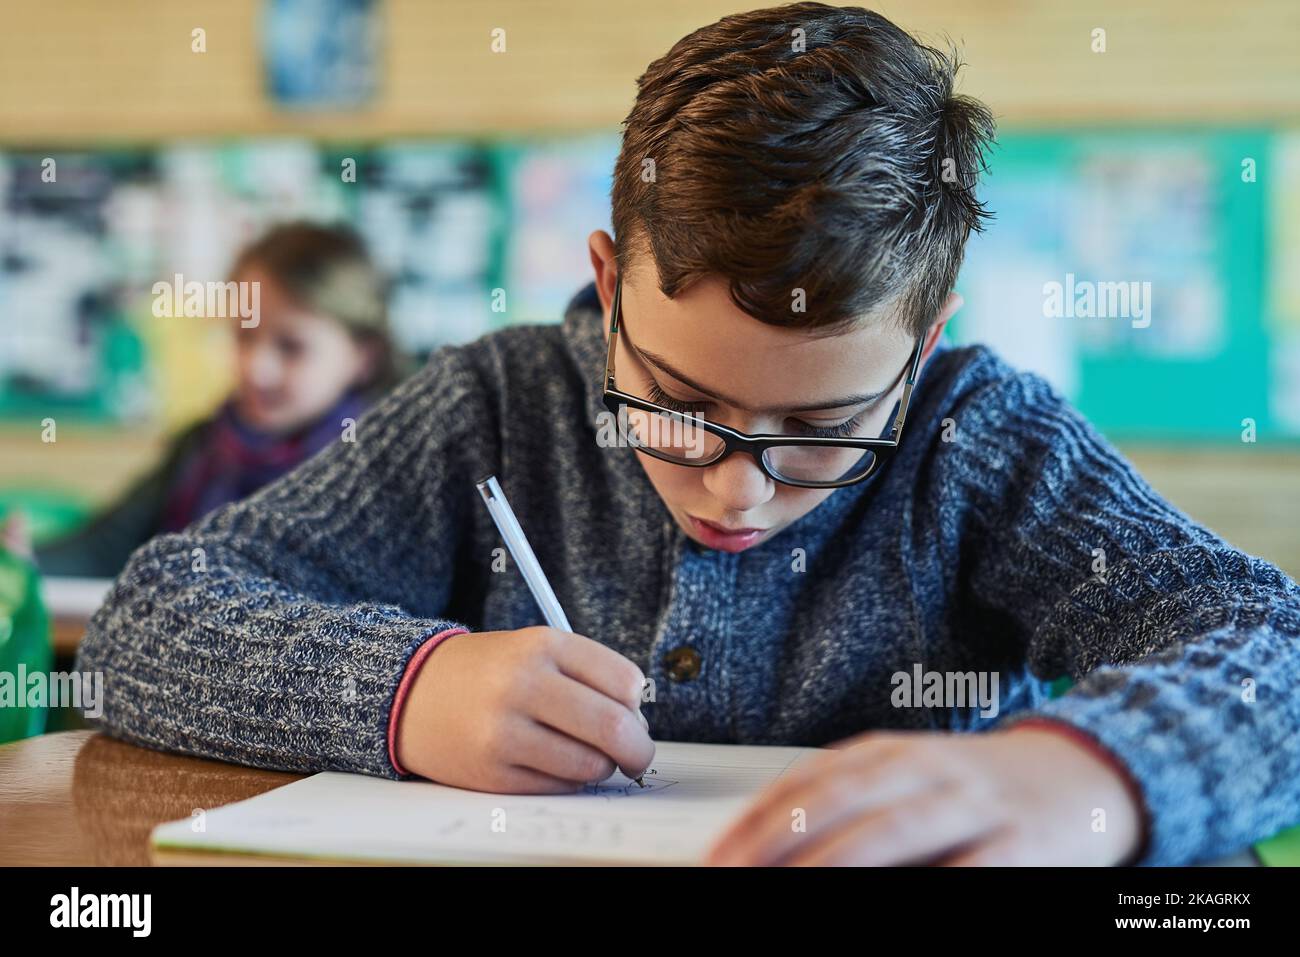 Got to work hard to stay a top student. an elementary school boy working in class. Stock Photo